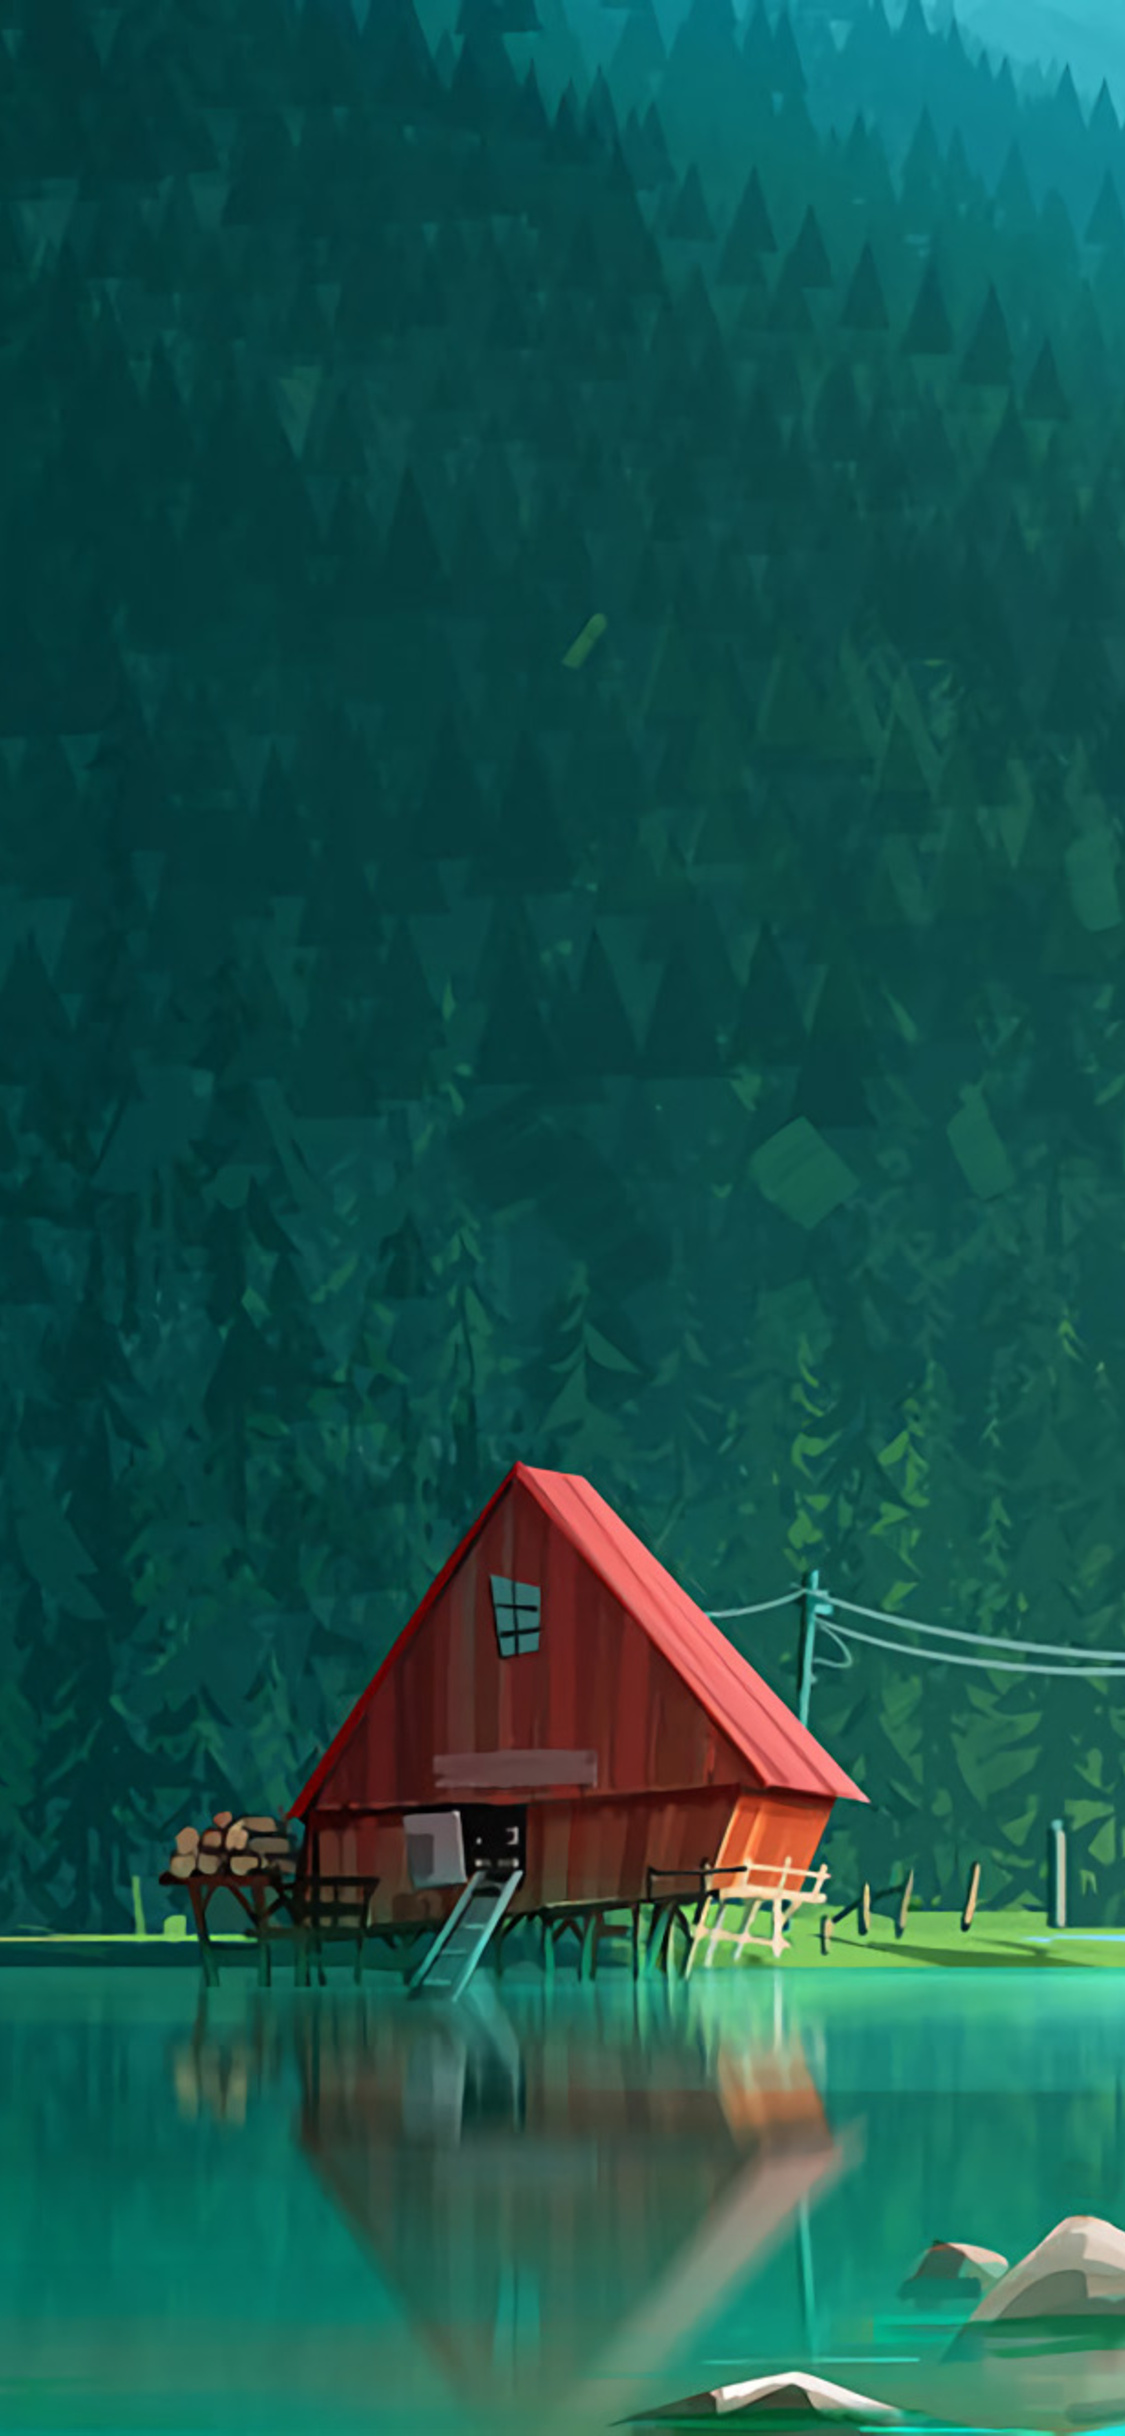 House In Woods Minimalism Wallpapers